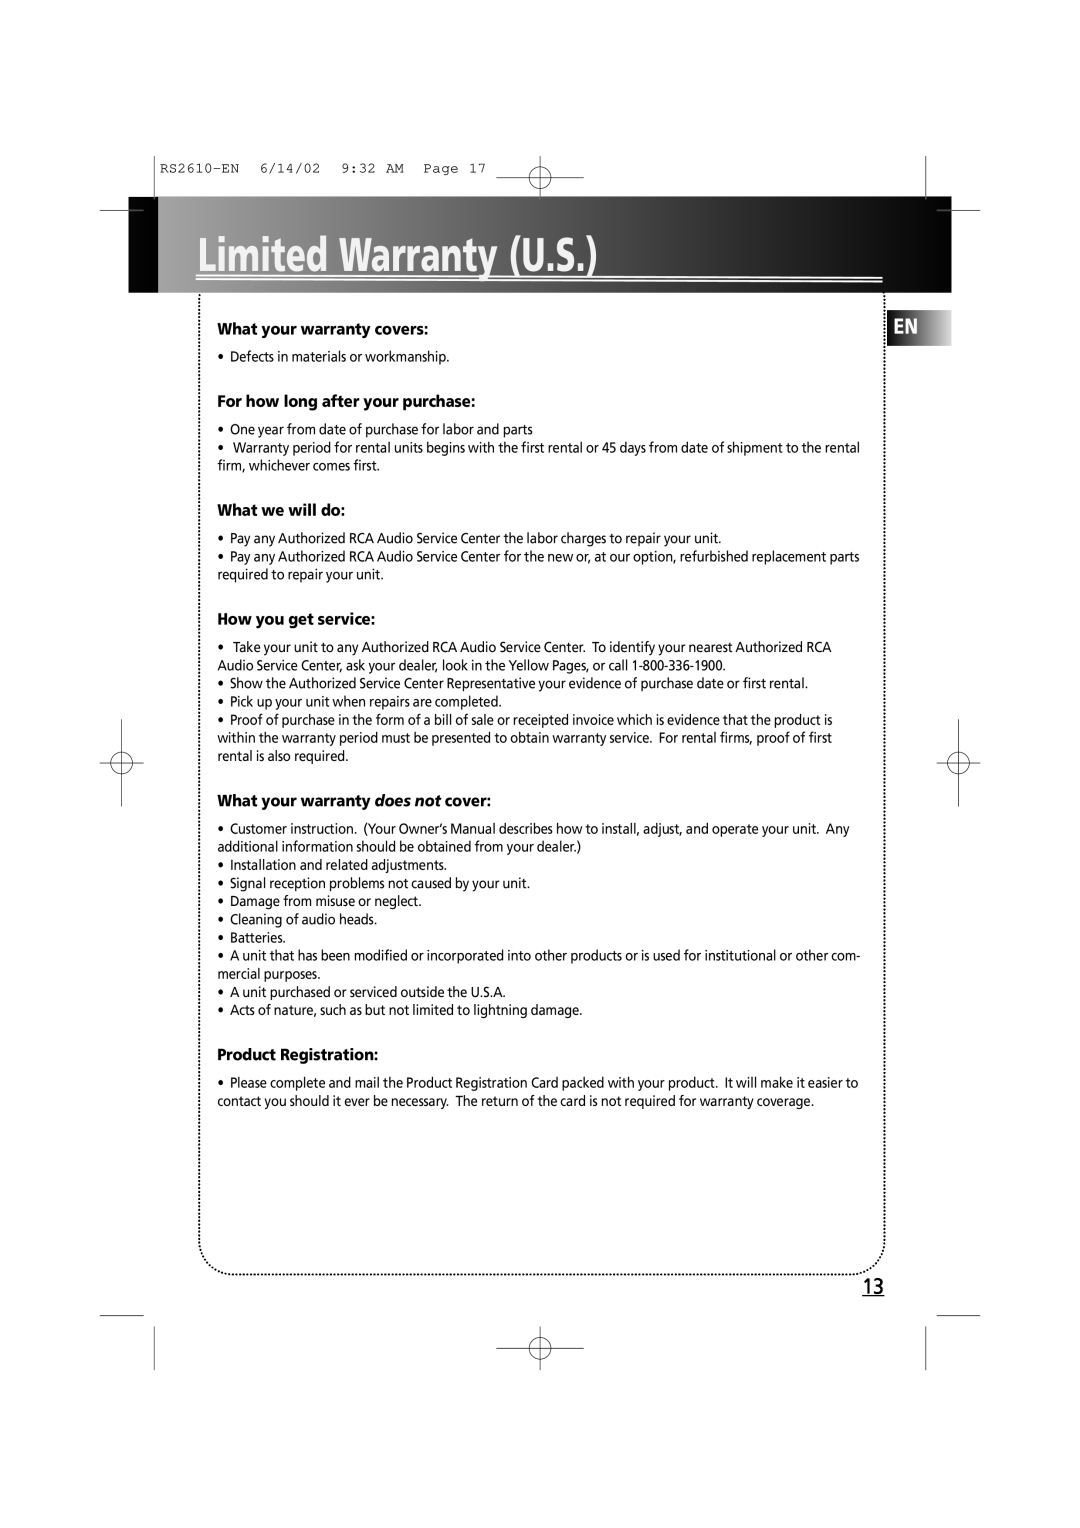 RCA fm radio tuner Limited Warranty U.S, What your warranty covers, For how long after your purchase, What we will do 